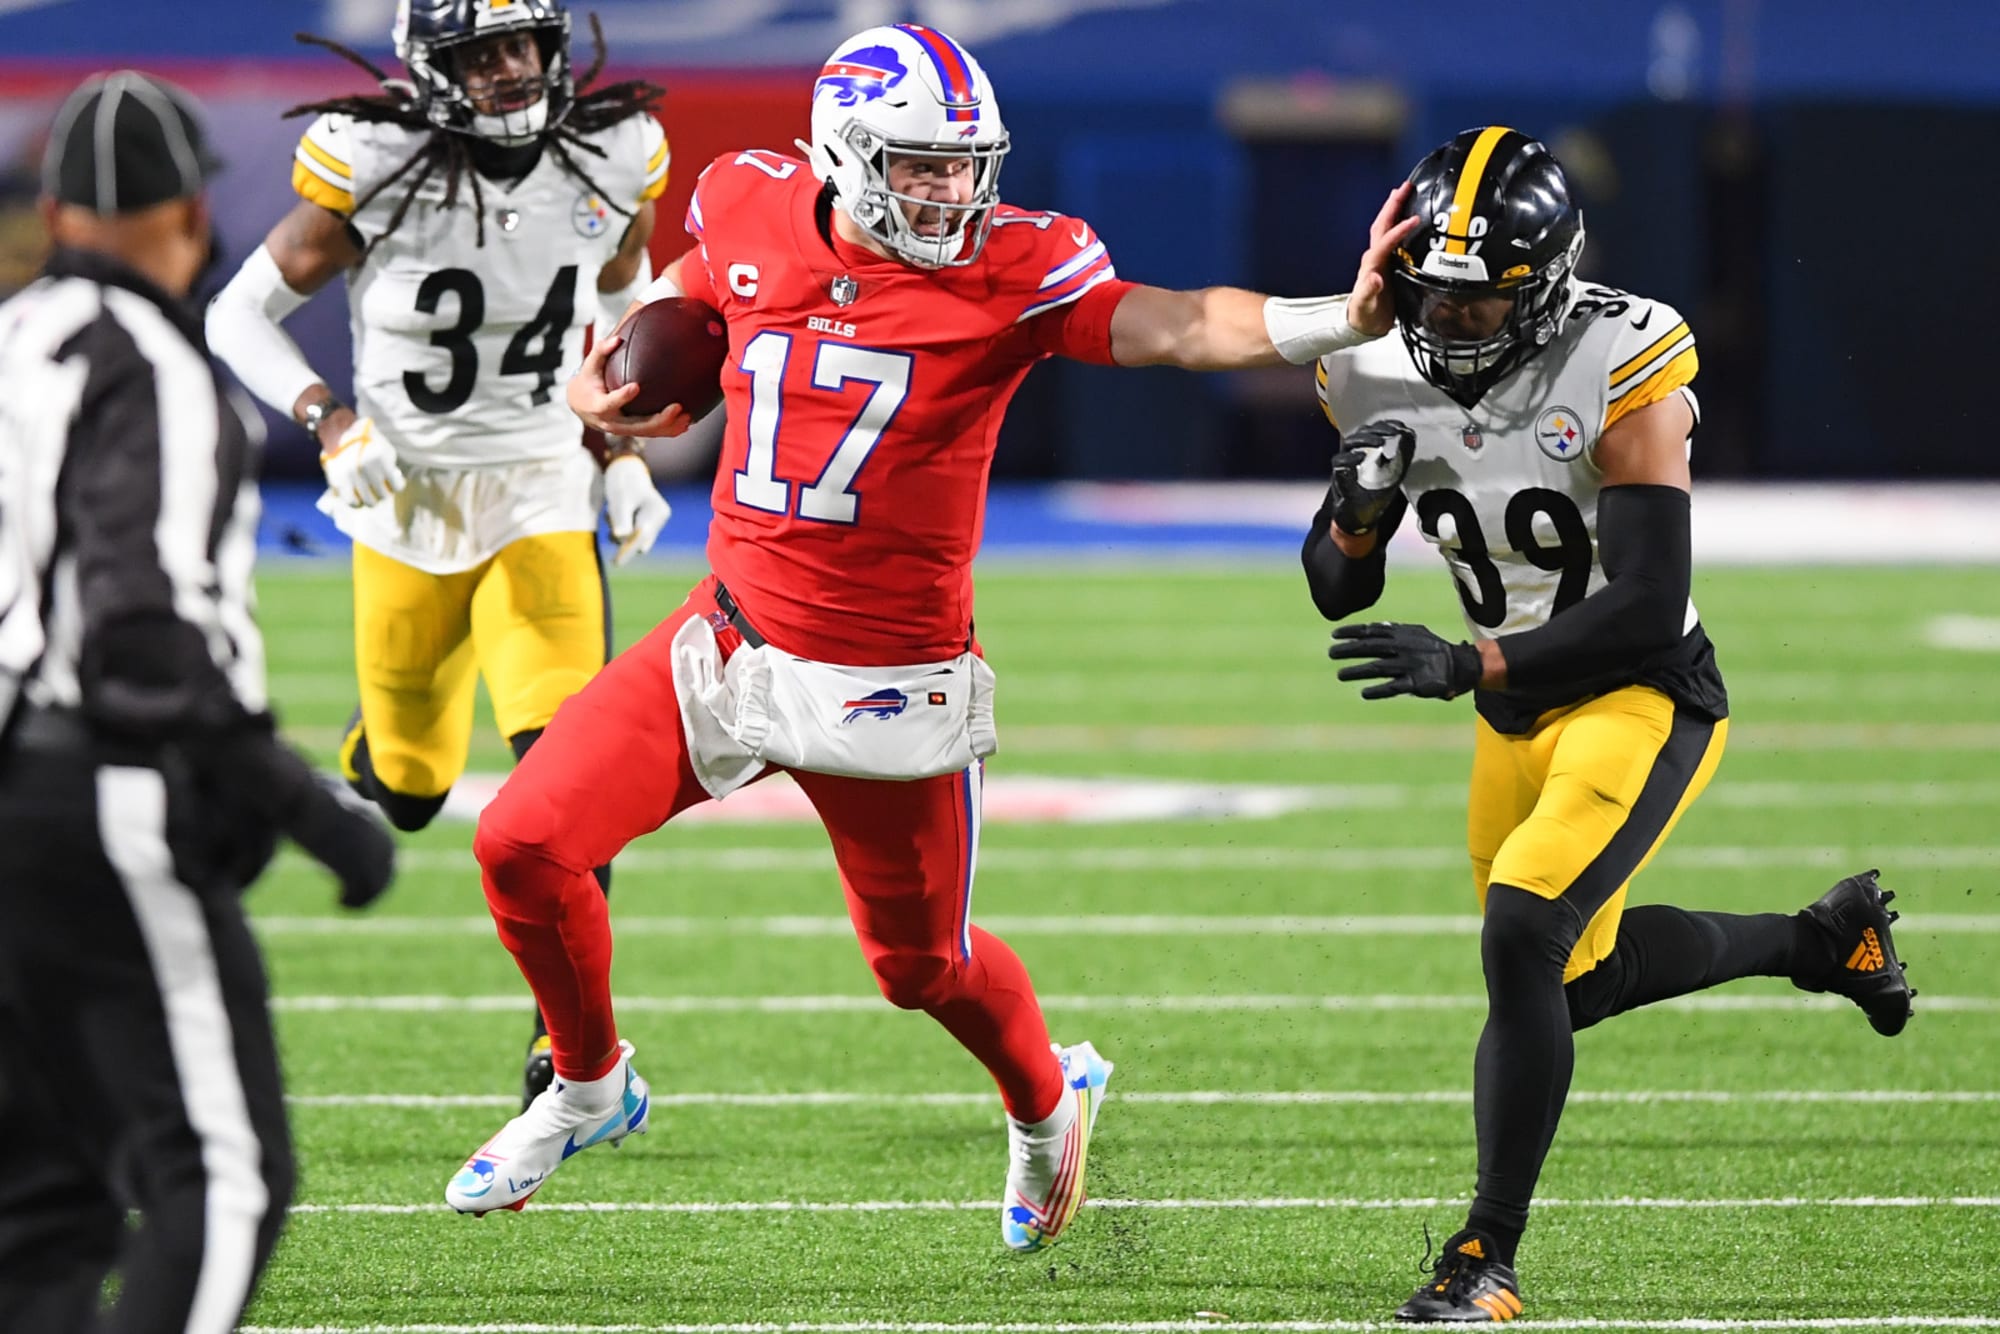 Buffalo Bills: 2021 schedule analysis and predictions